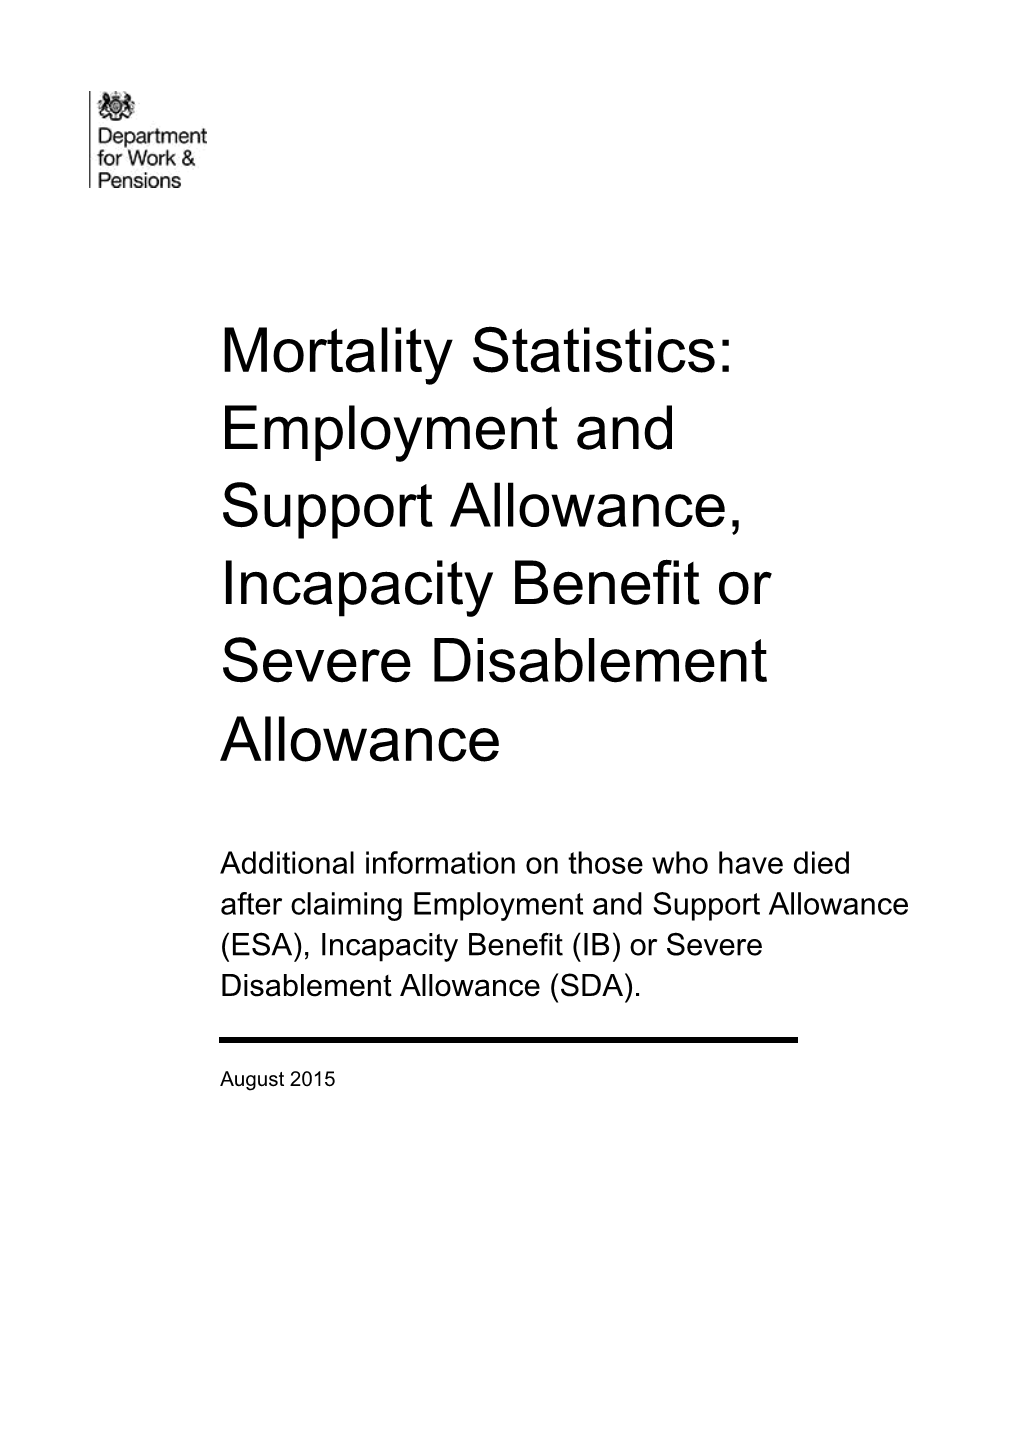 Employment and Support Allowance, Incapacity Benefit Or Severe Disablement